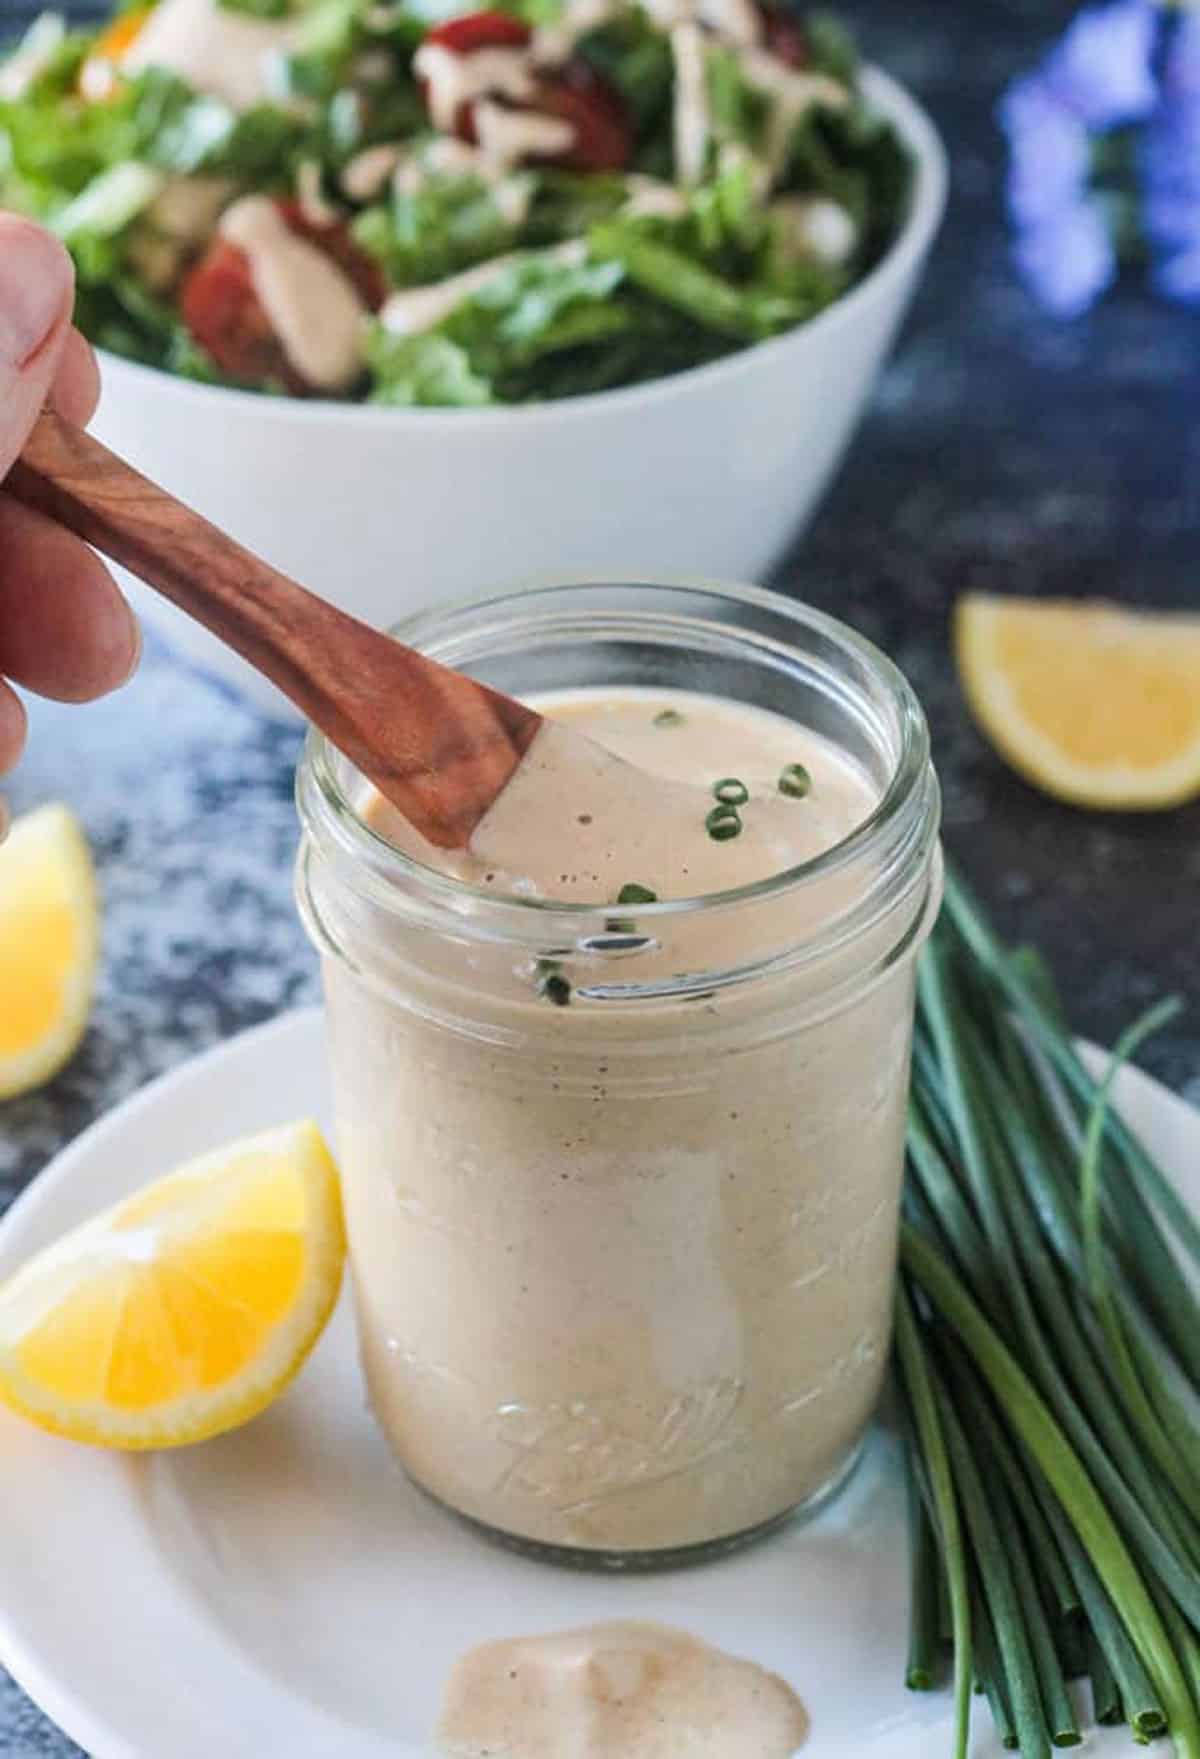 Wooden spoon in a glass jar of vegan ranch dressing.